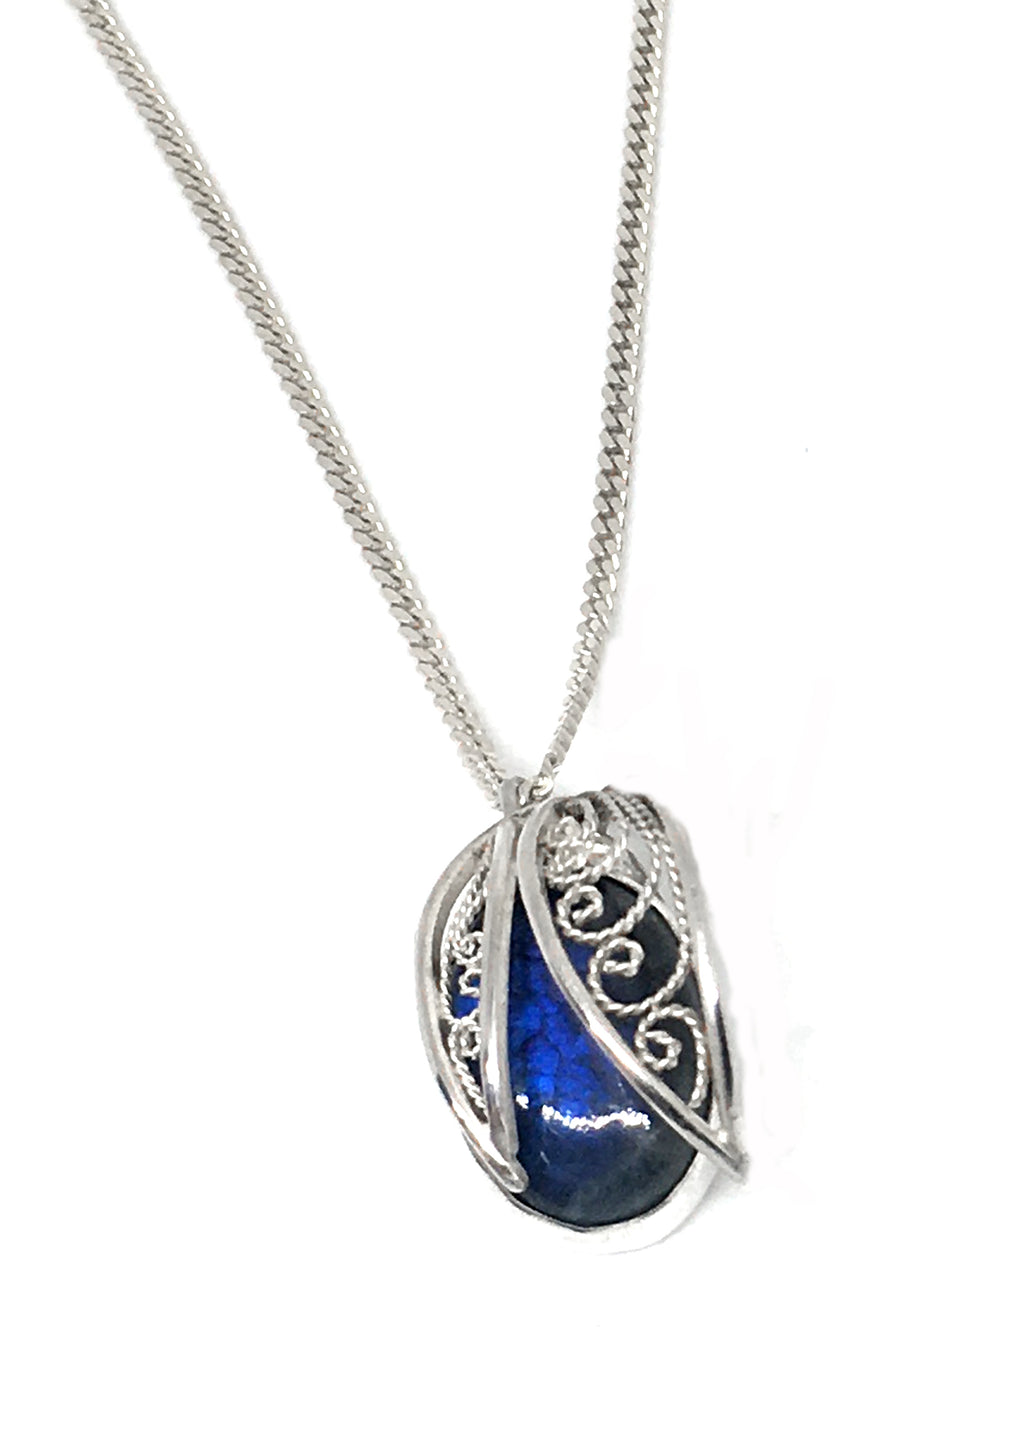 handmade silver filigree and labradorite pendant necklace on sterling silver curb chain